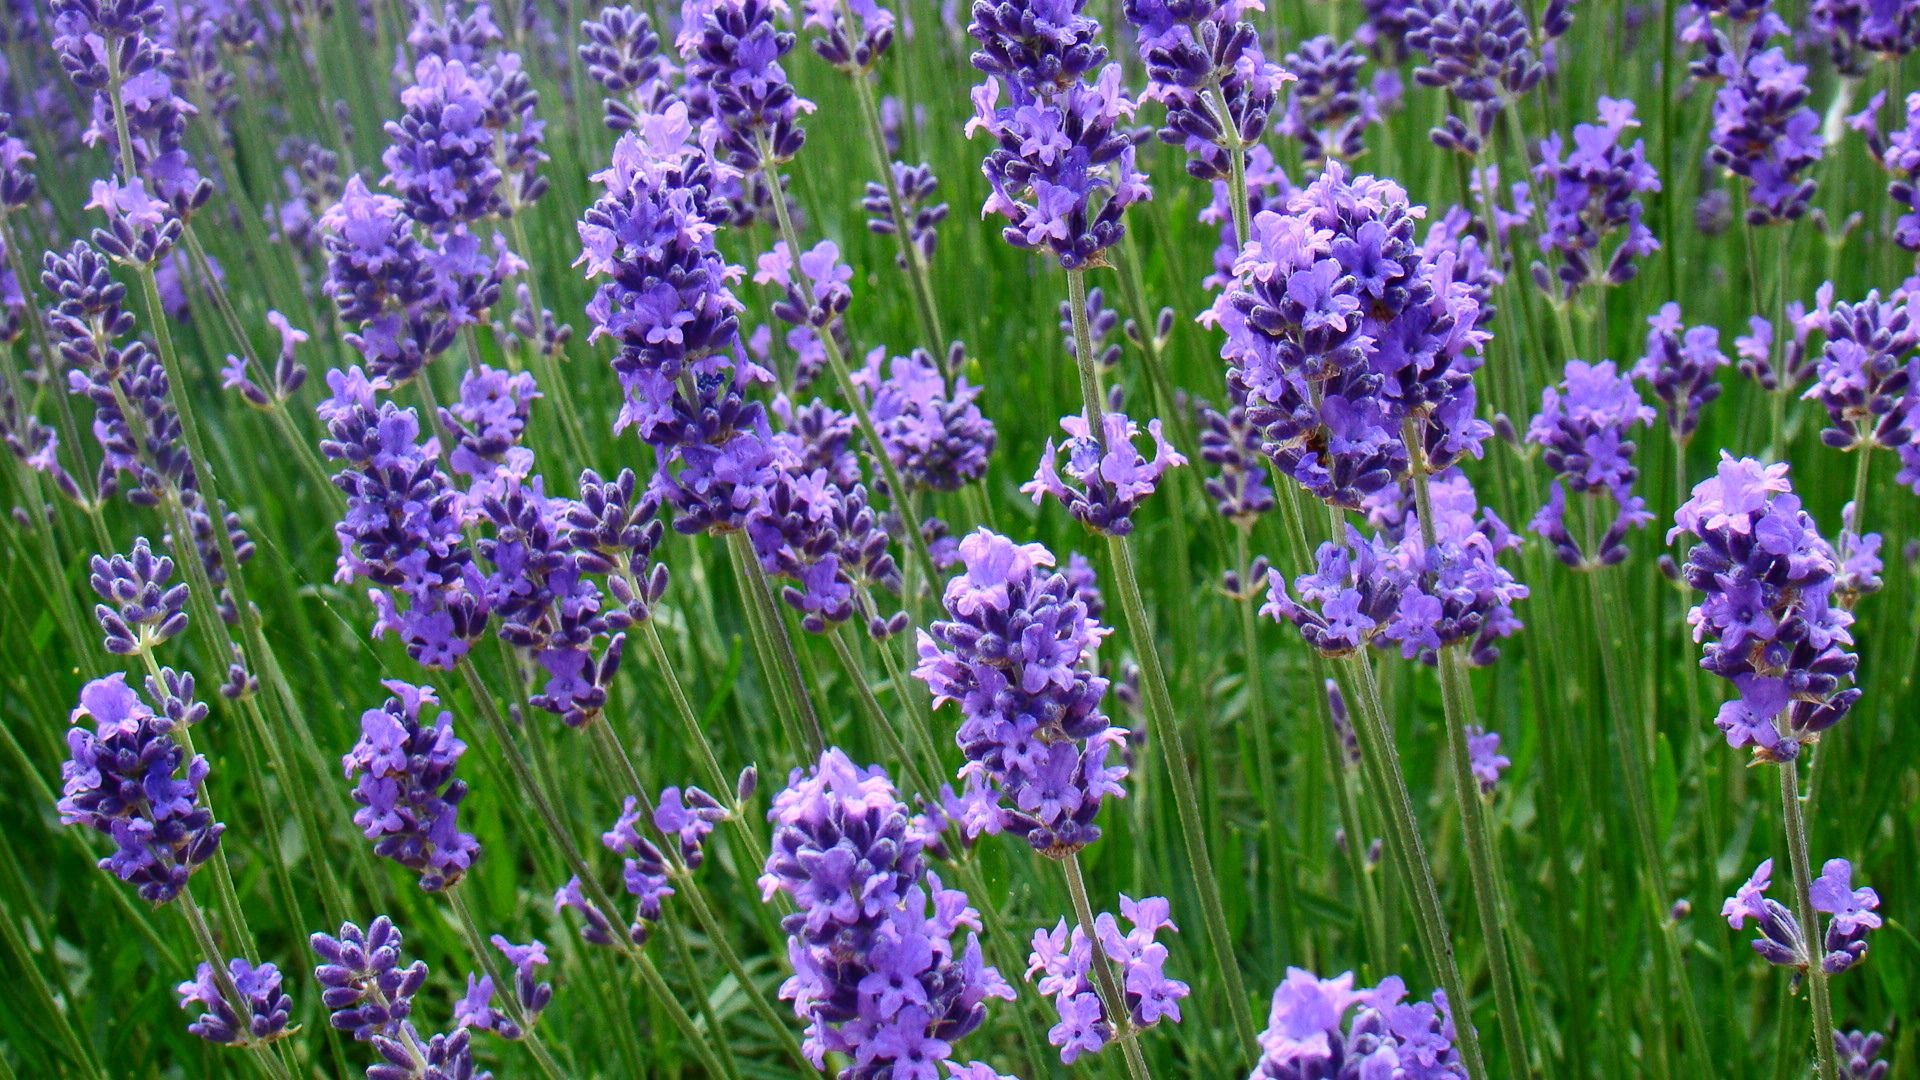 A tight shot of blooming lavender